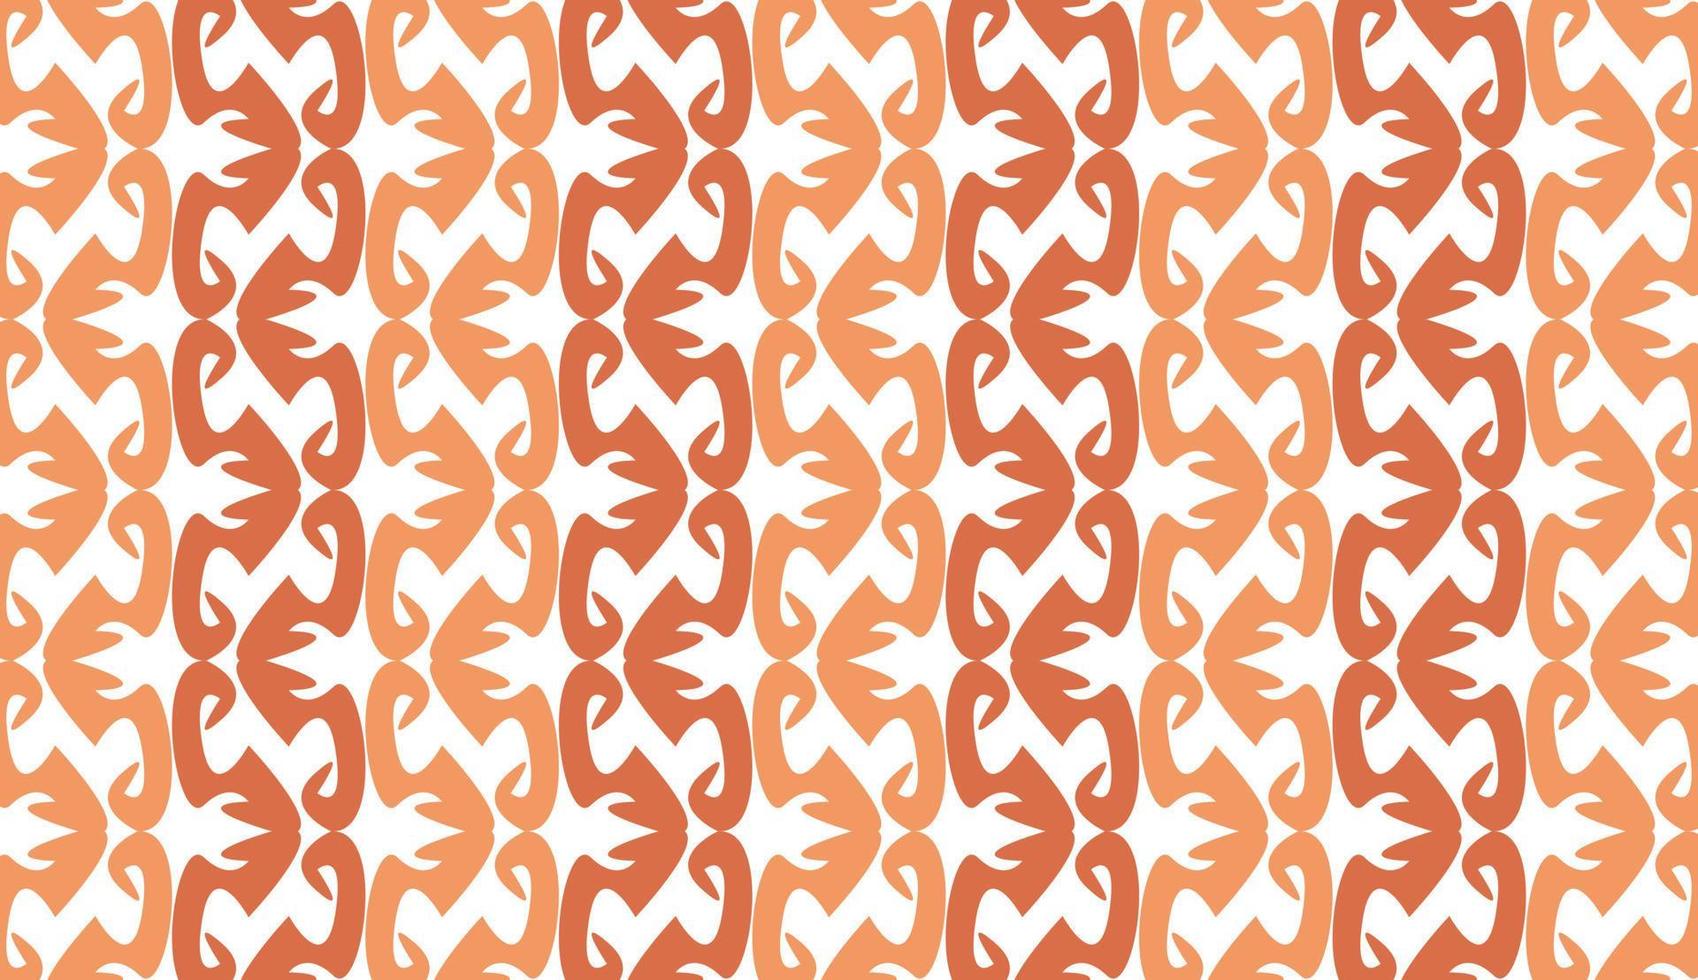 Seamless pattern. Elegant ethnic motif. Minimalist style pattern design. Suitable for fabric pattern. Can be used for posters, brochures, postcards, and other printing needs. Vector illustration